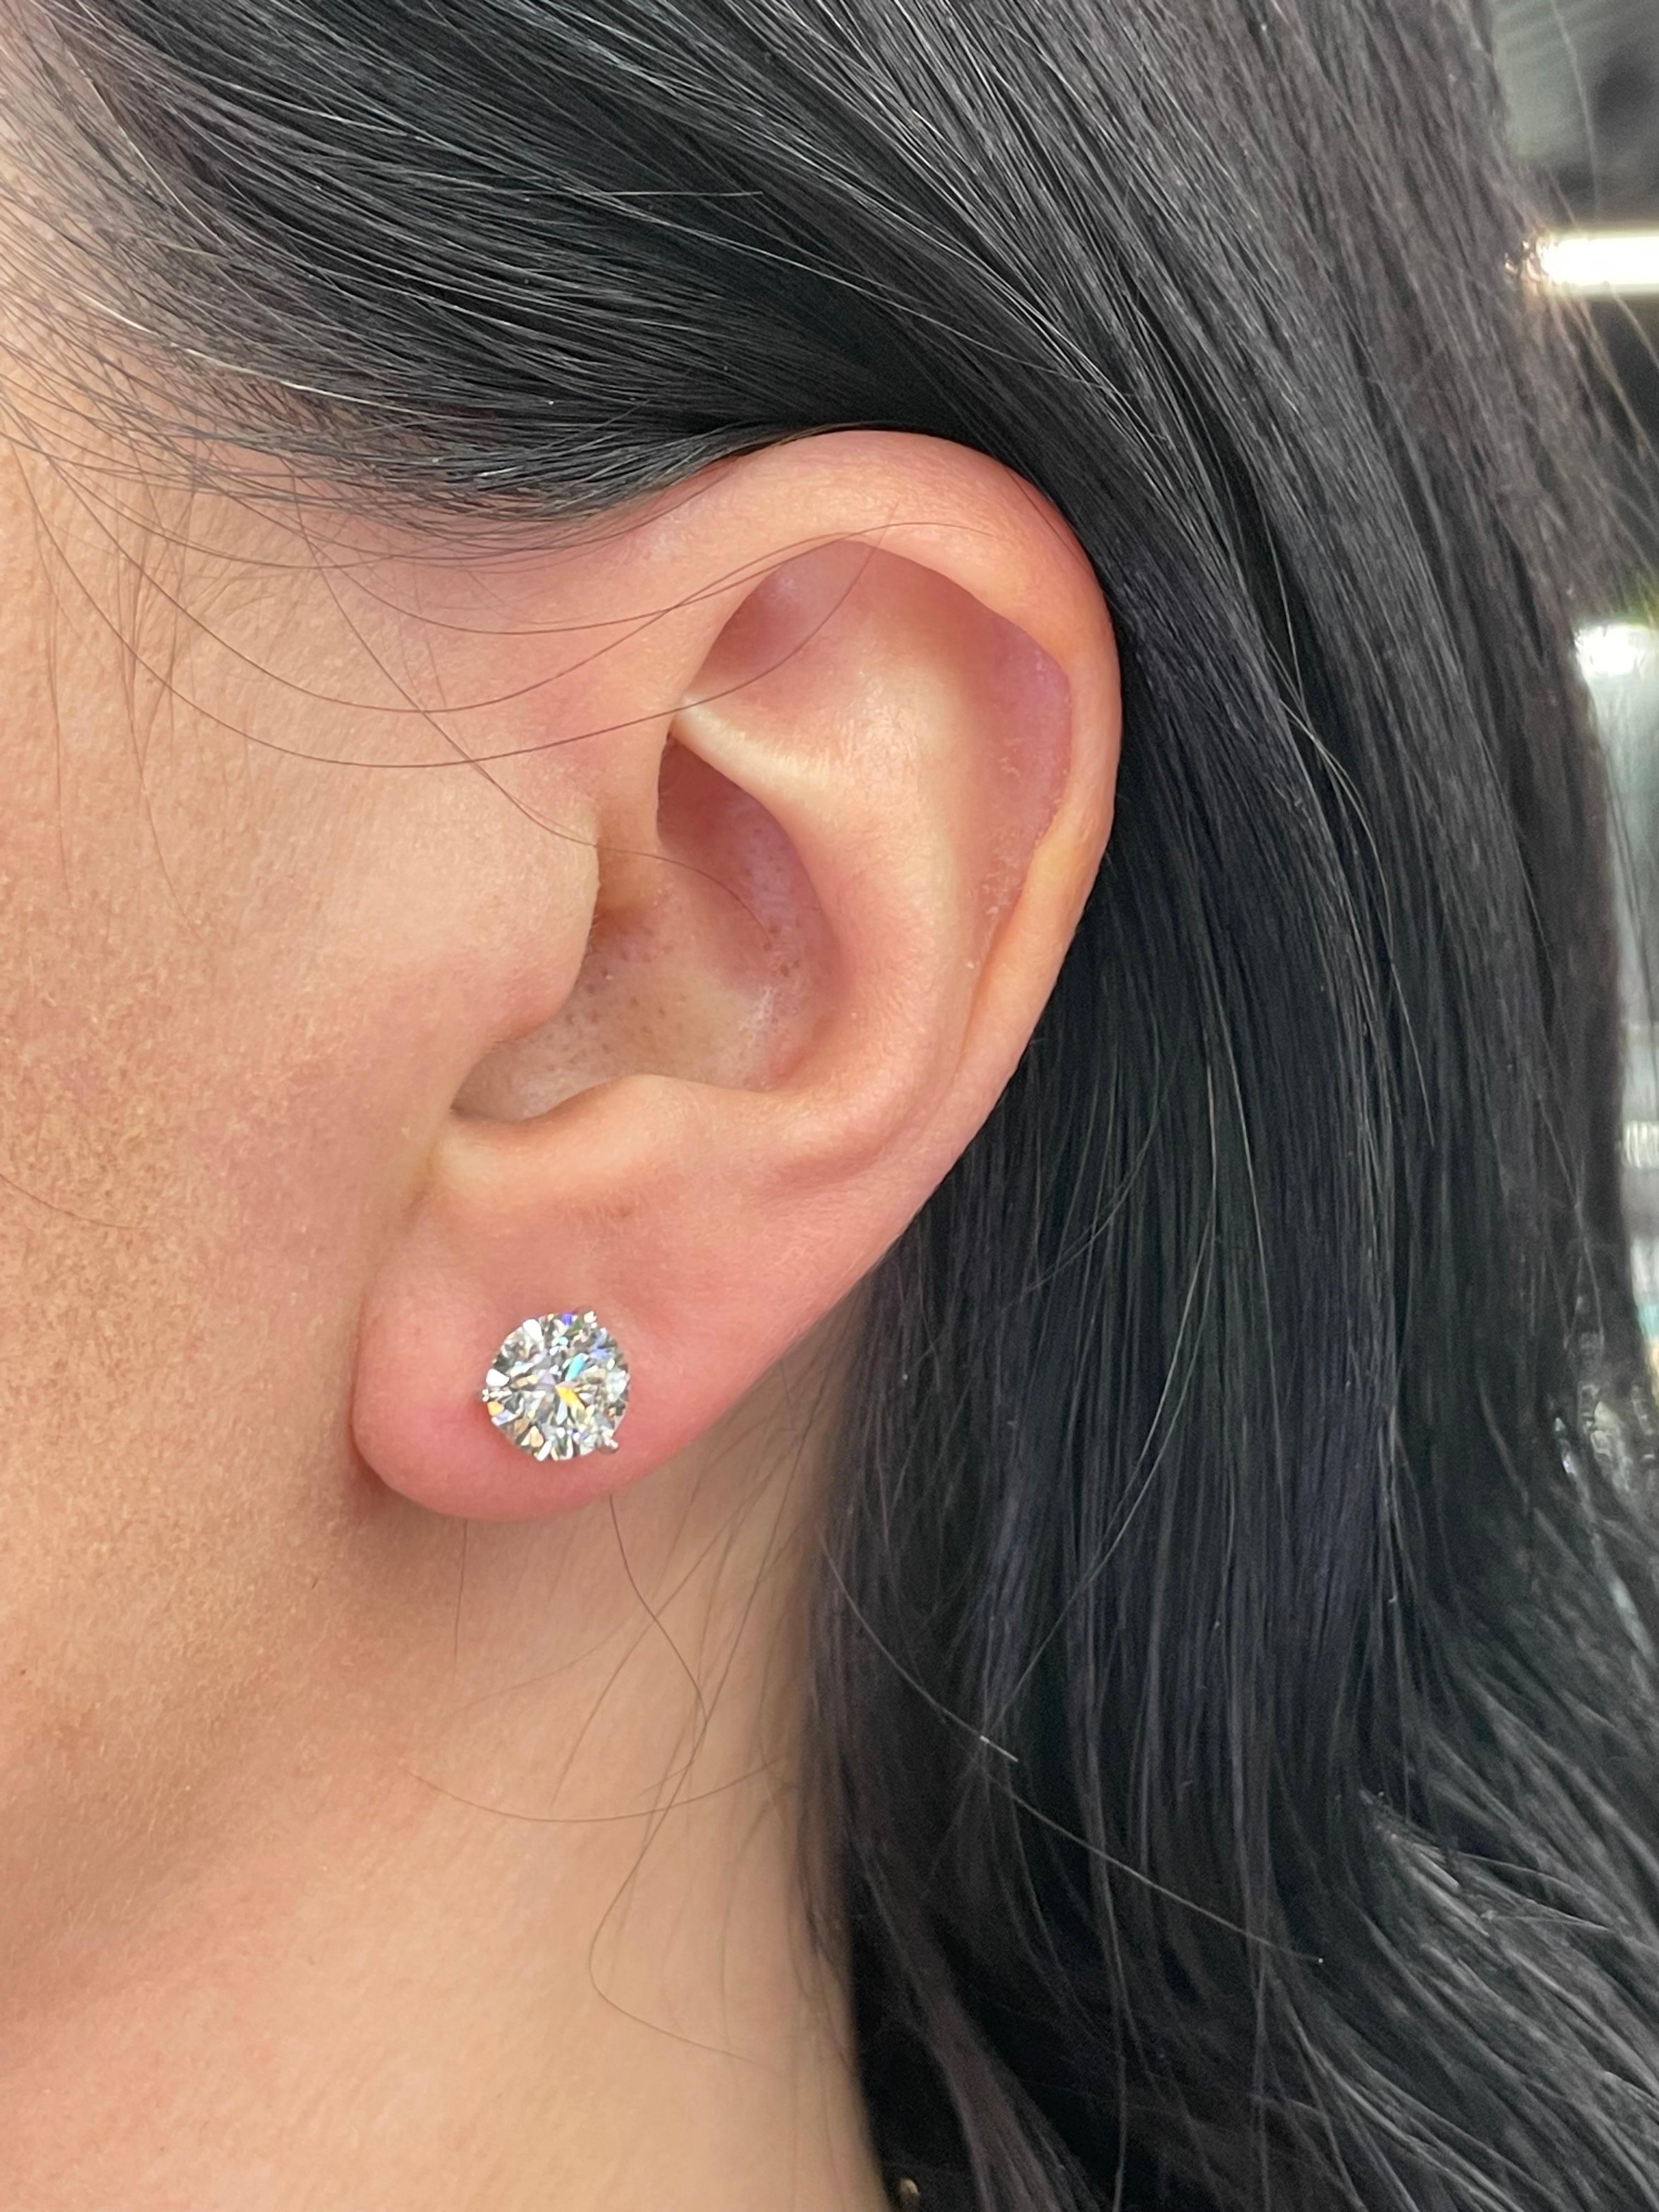 Diamond stud earrings weighing 3.09 Carats, Color J-K Clarity I1, in 18 Karat White Gold 3 prong Champagne setting. 
Nice Life & Clean to the Eye 
Setting can be changed to a Basket, Martini or Champagne/ 3 or 4 Prong/ 14 or 18 Karat.

DM for more